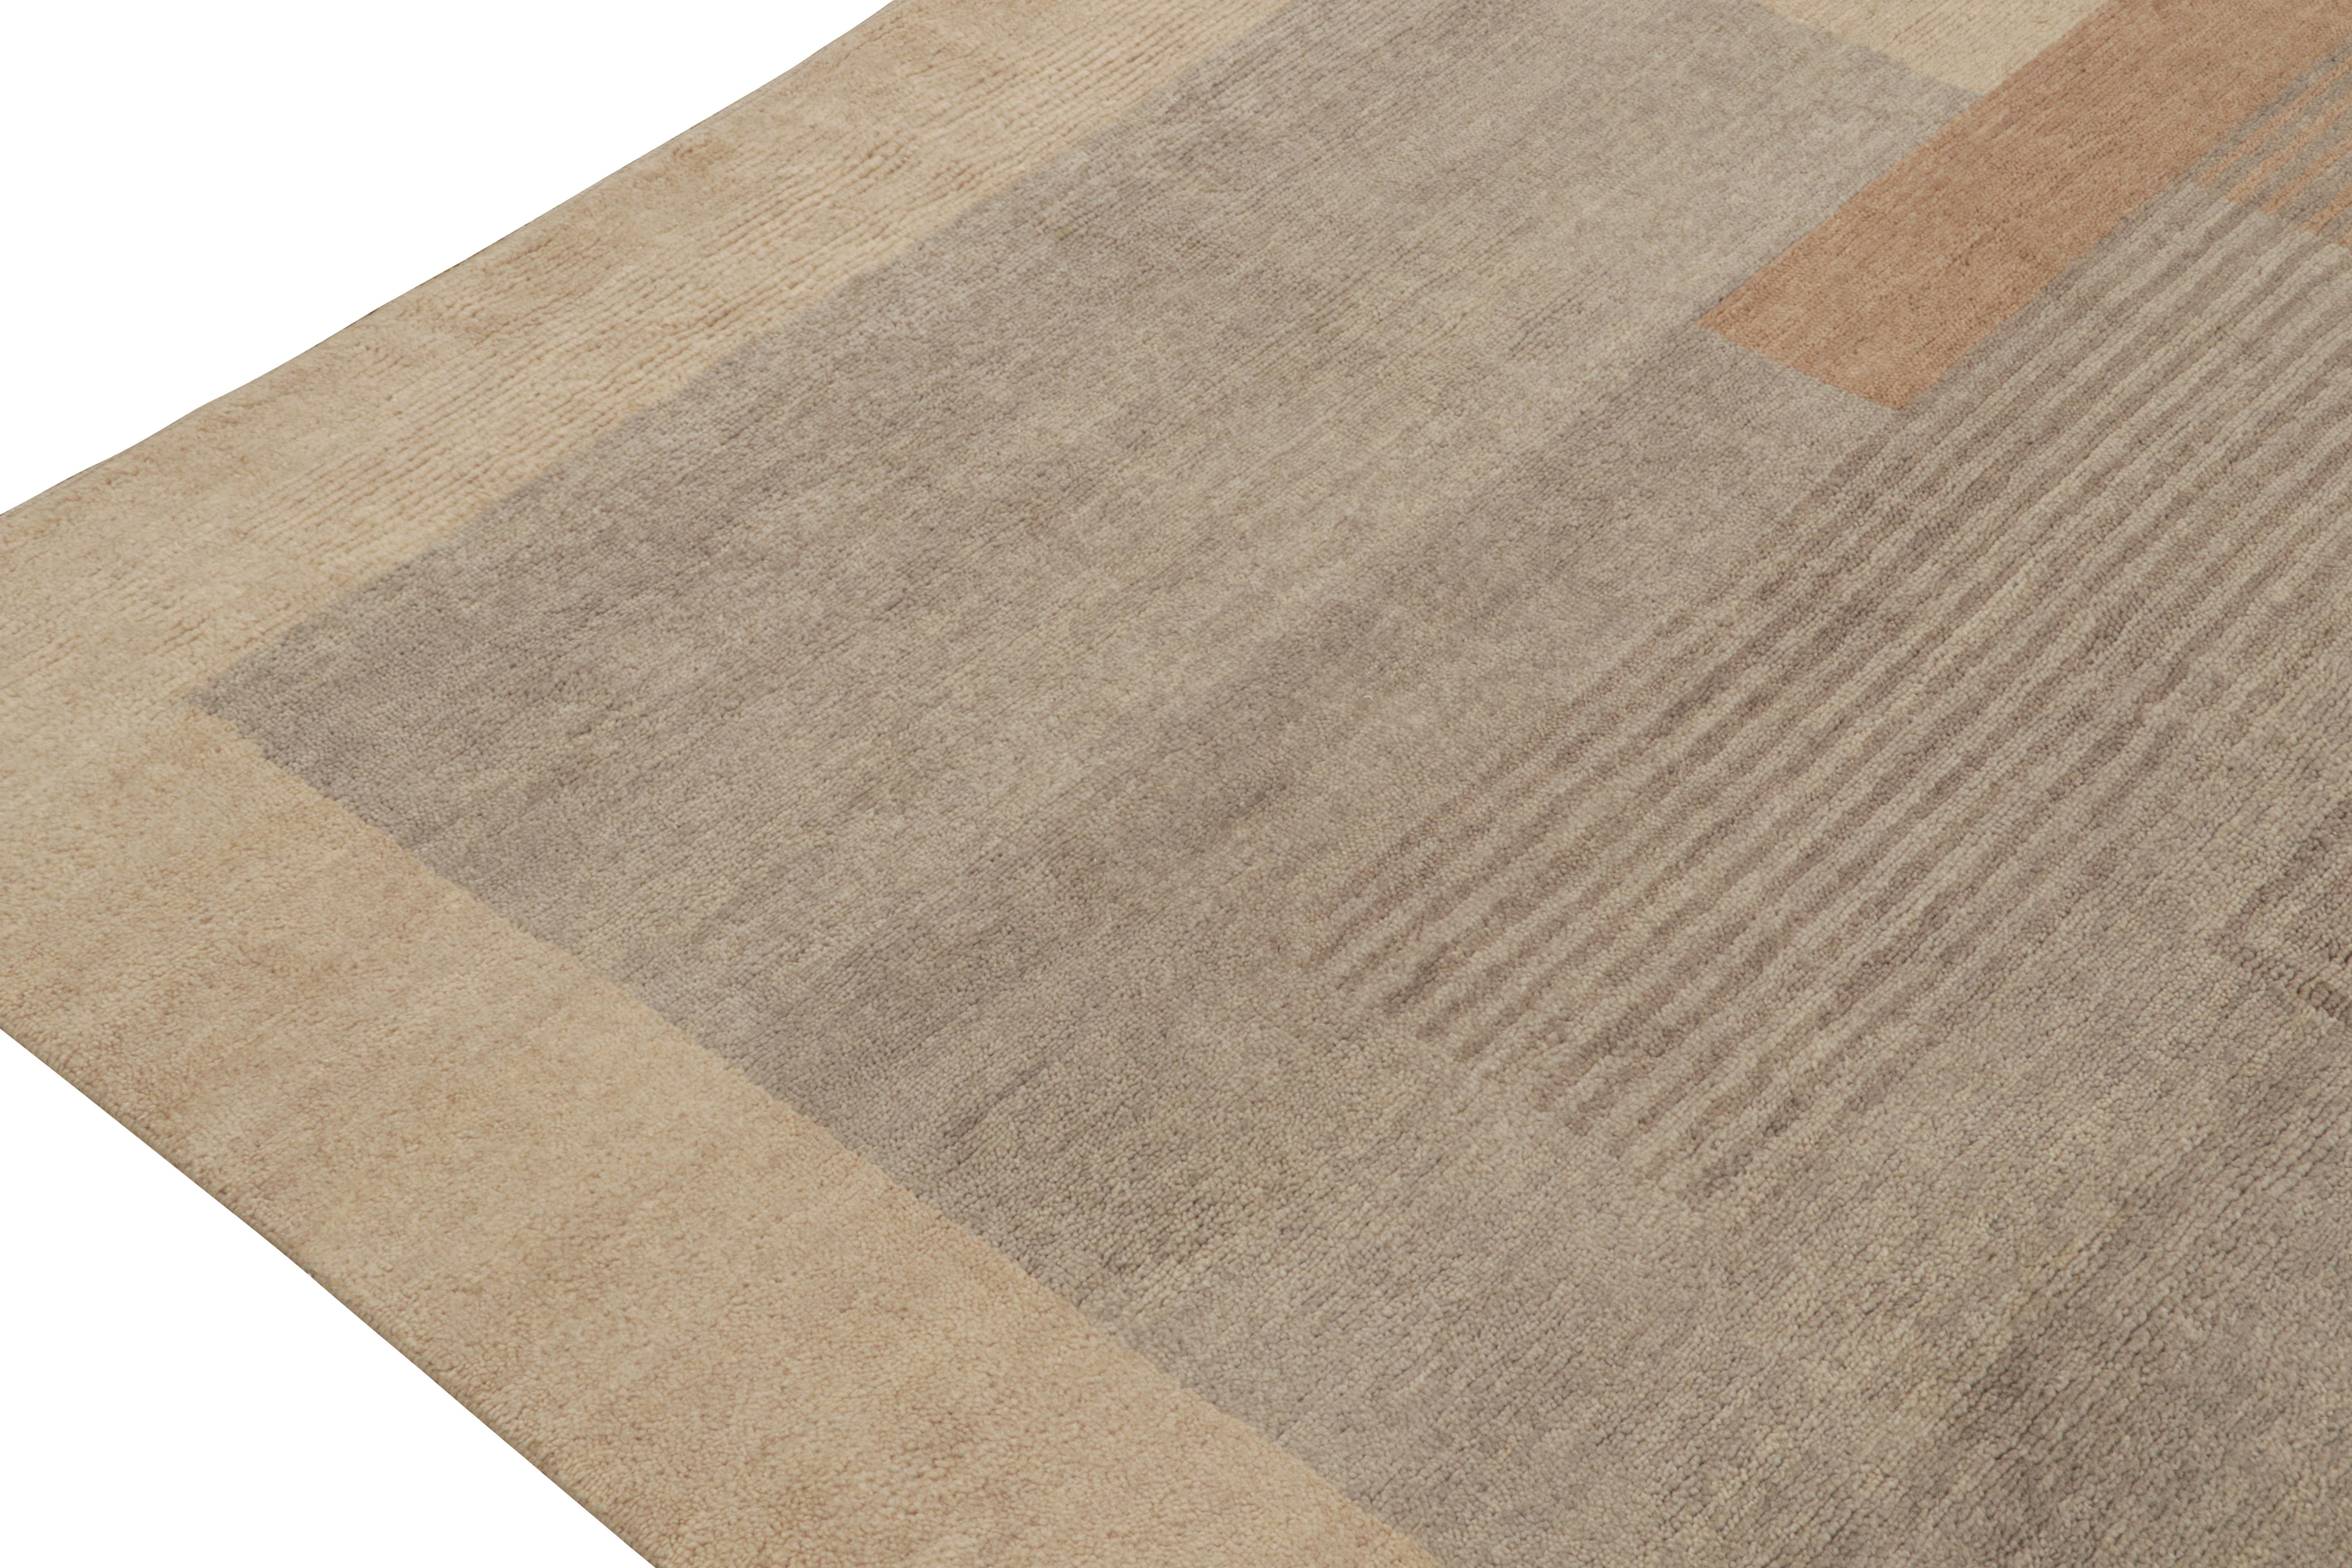 Indian Rug & Kilim’s French Art Deco Style Rug in Beige-Brown & Grey Geometric Pattern For Sale